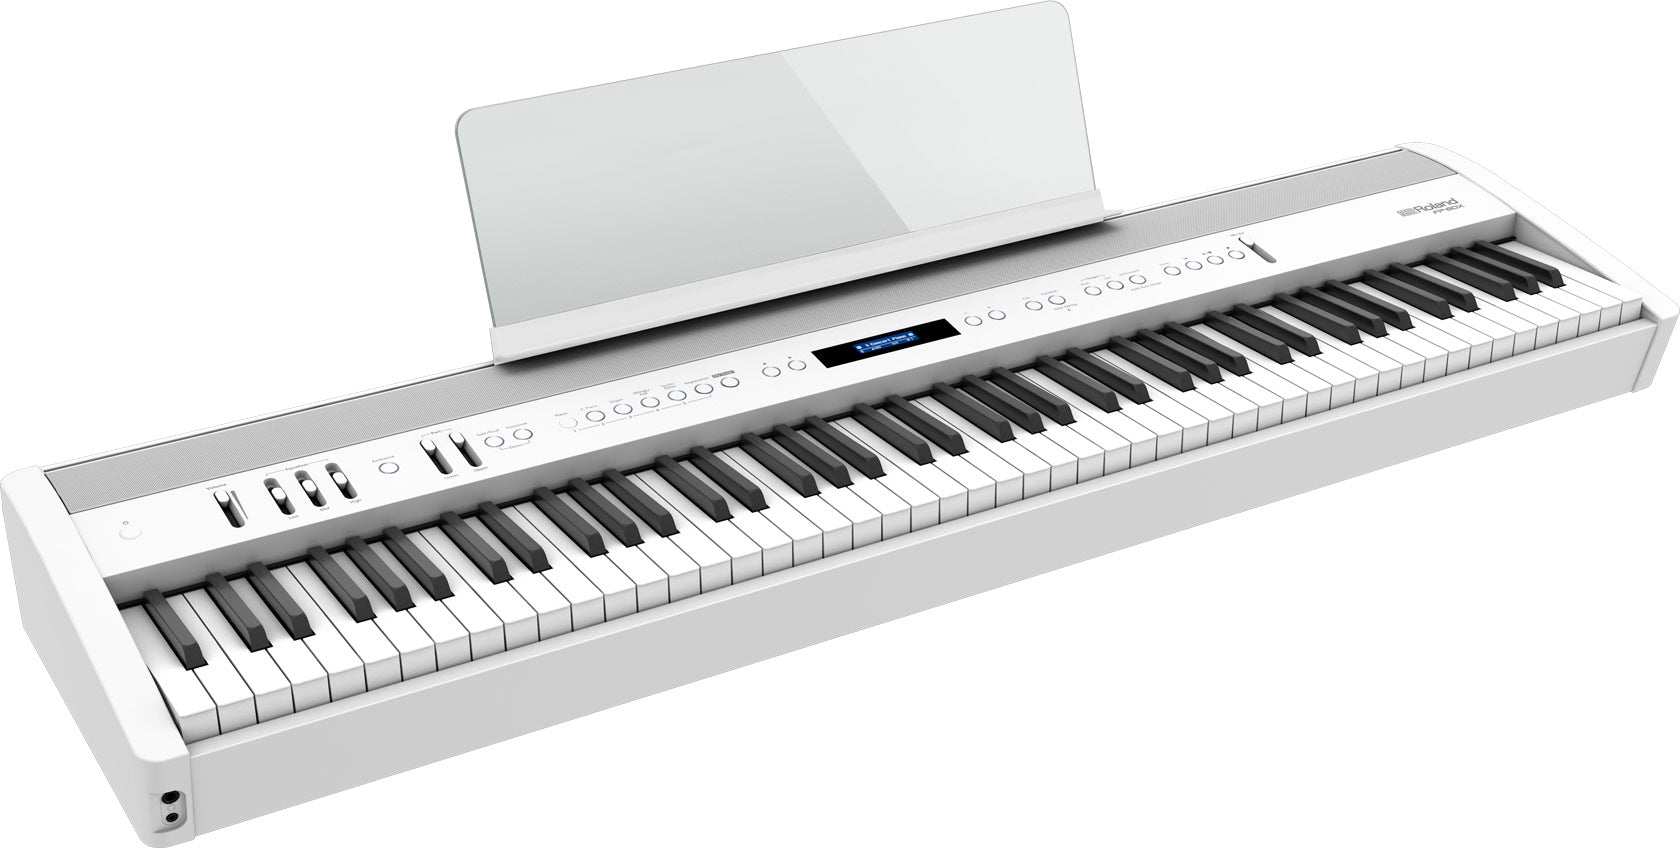 Roland FP-60X 88-key Digital Piano Musician Package with RH-5 Headphone and DP-10 Pedal - White (FP60X / FP 60X), ROLAND, DIGITAL PIANO, roland-digital-piano-fp-60x-wh, ZOSO MUSIC SDN BHD